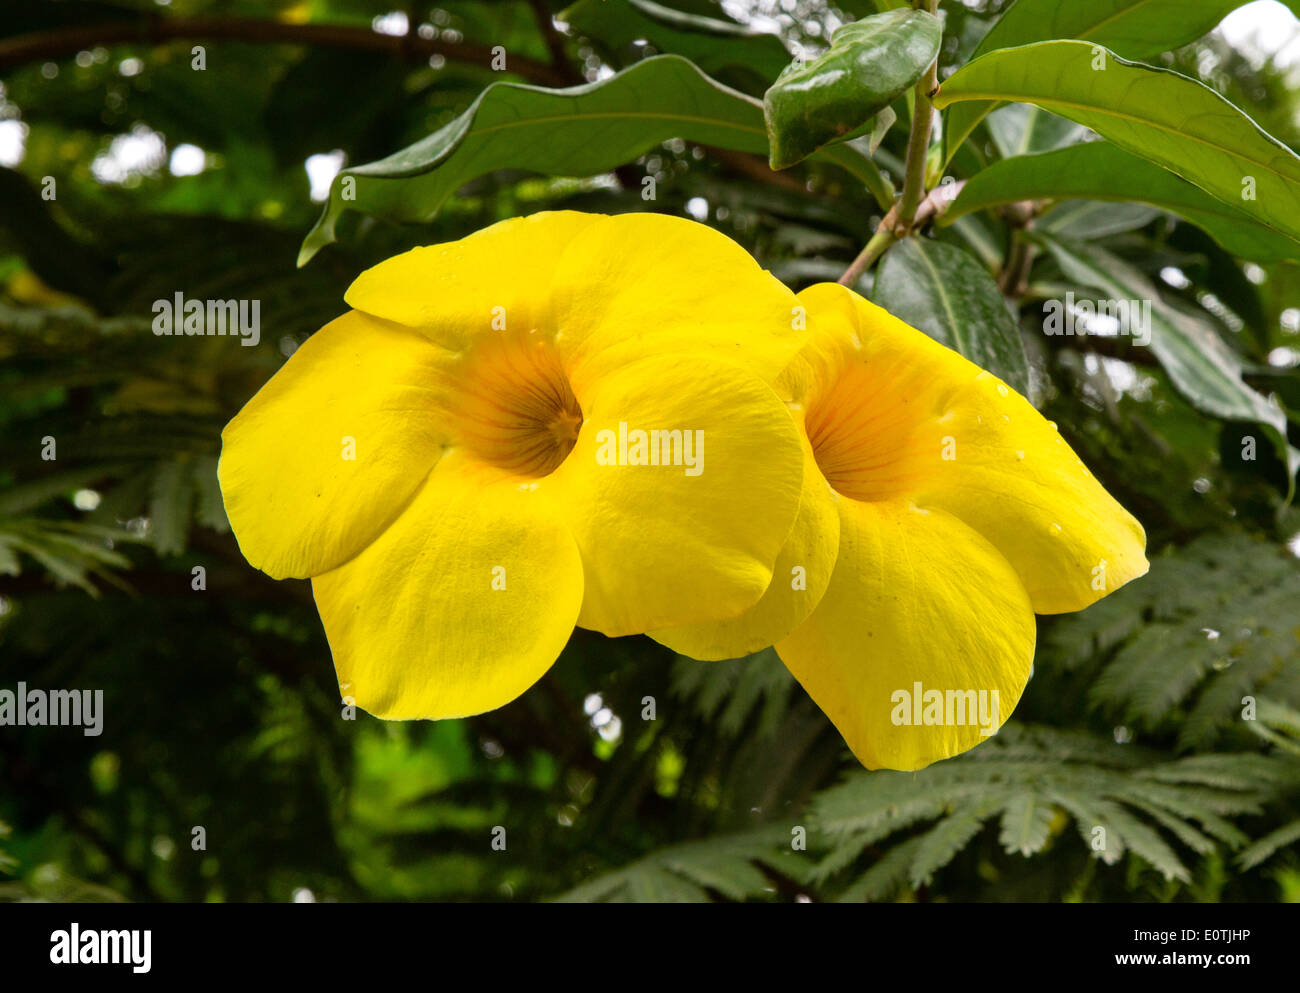 Large yellow trumpet shaped flowers of a tropical shrub in Costa Rica Stock Photo